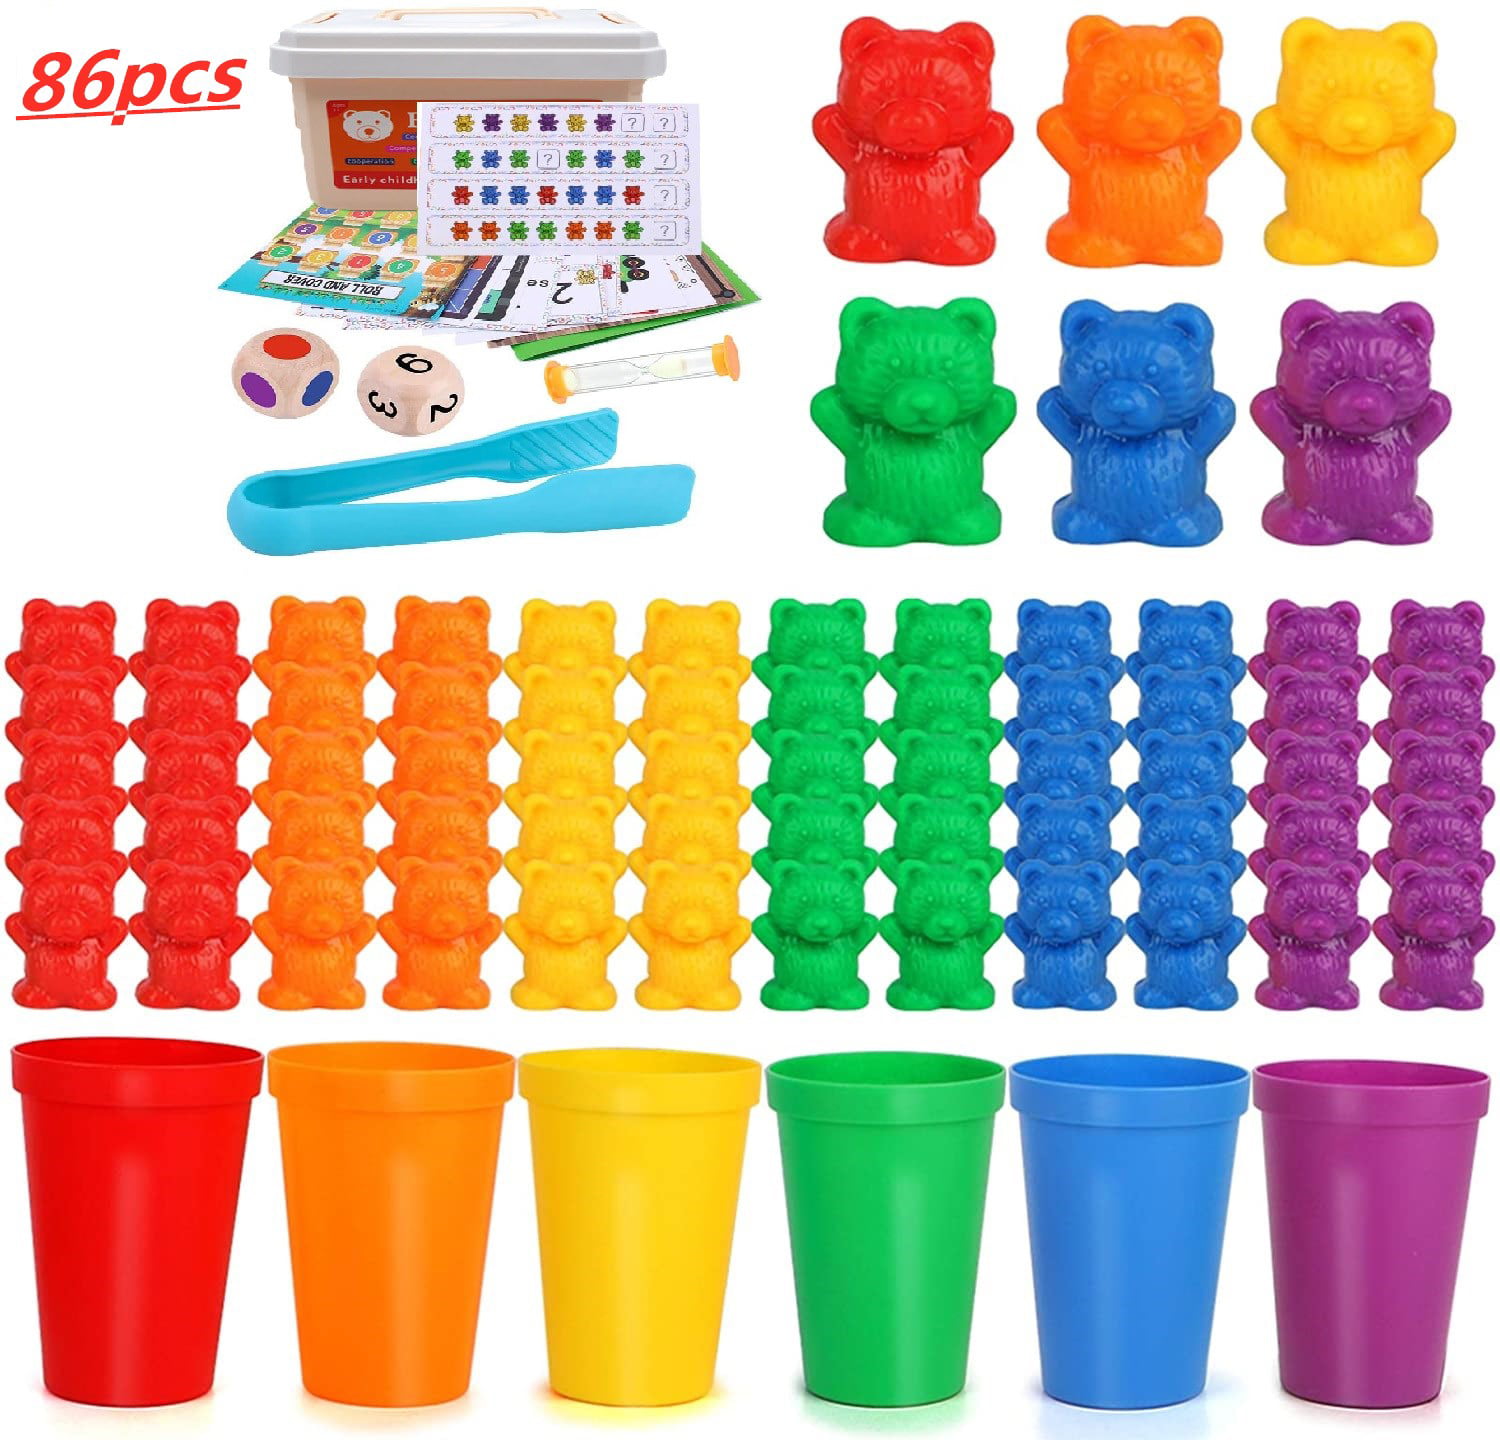 Counting Bears Set with Matching Sorting iufvbgxdh 71pcs Rainbow Counting Bears 